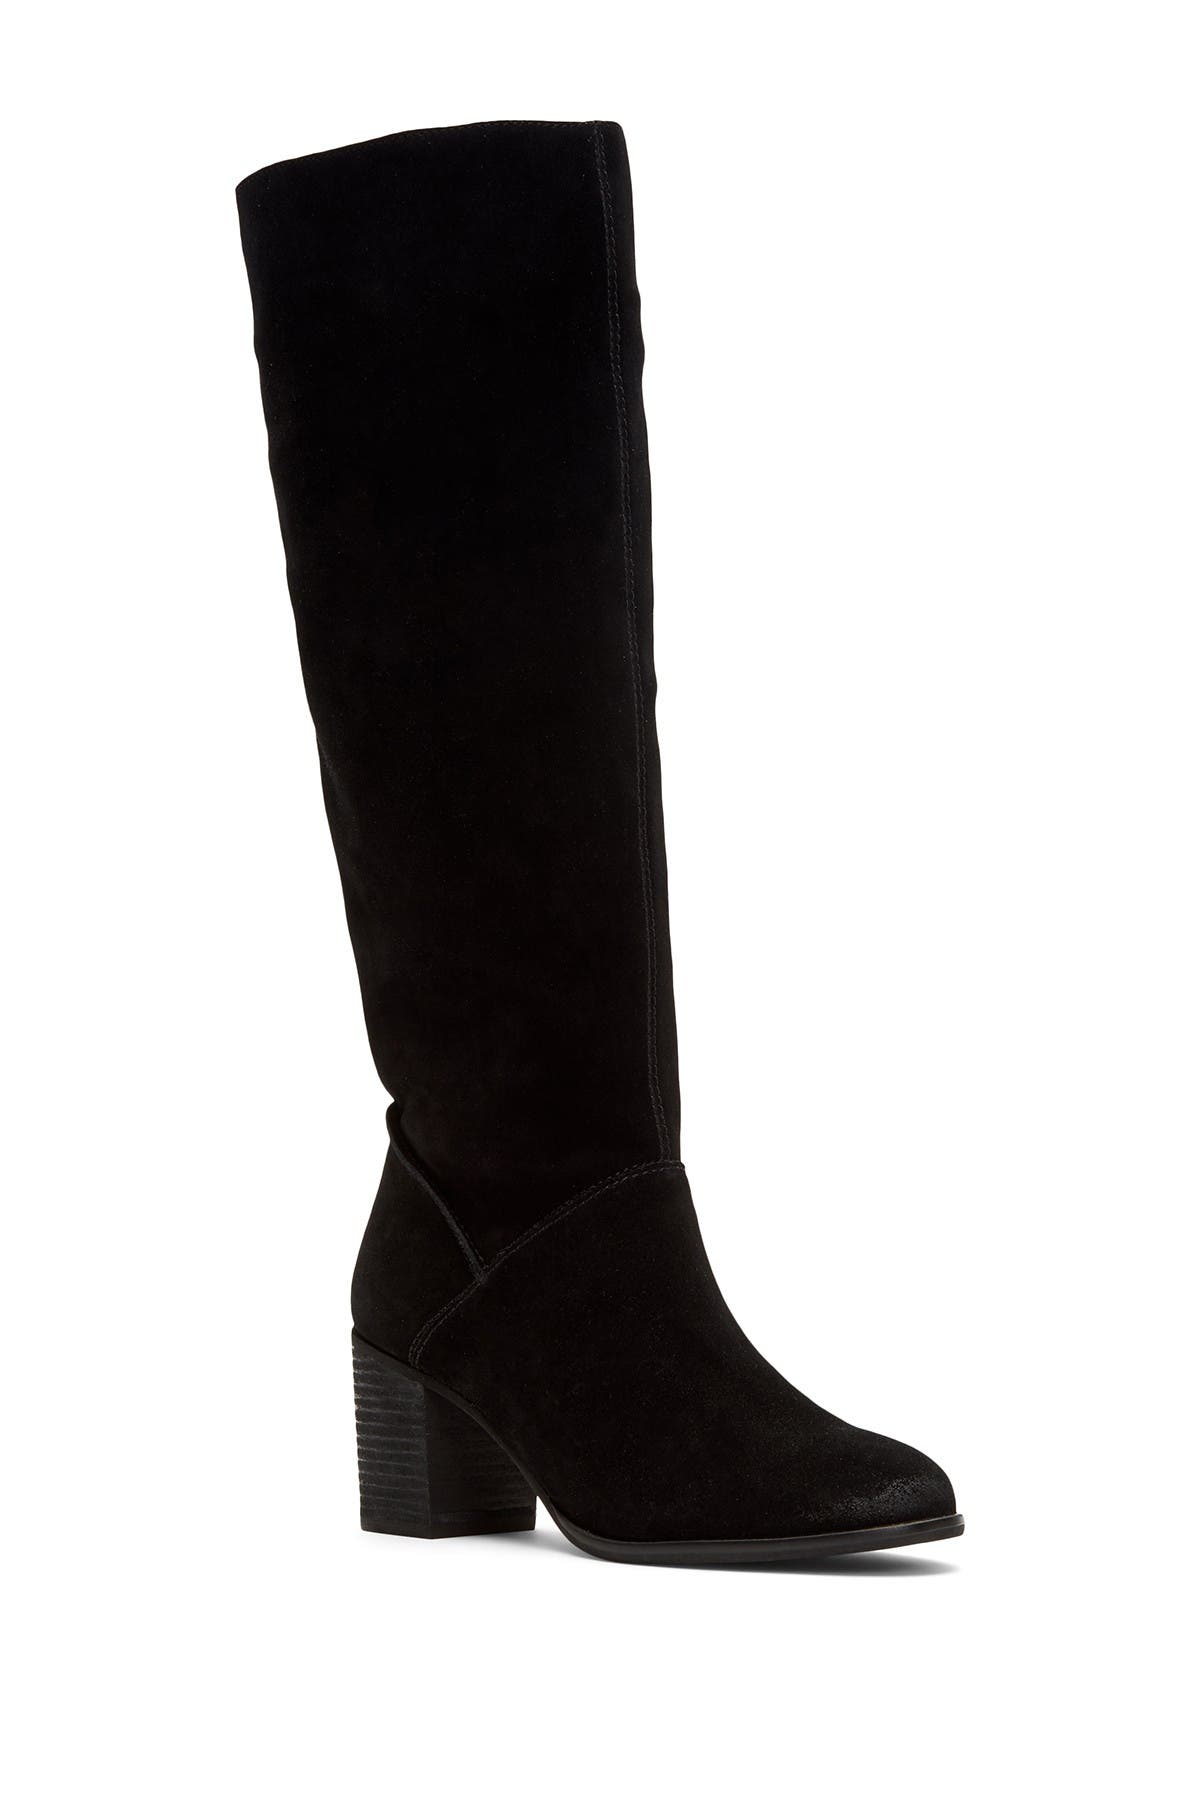 east 5th womens nile slouch boots